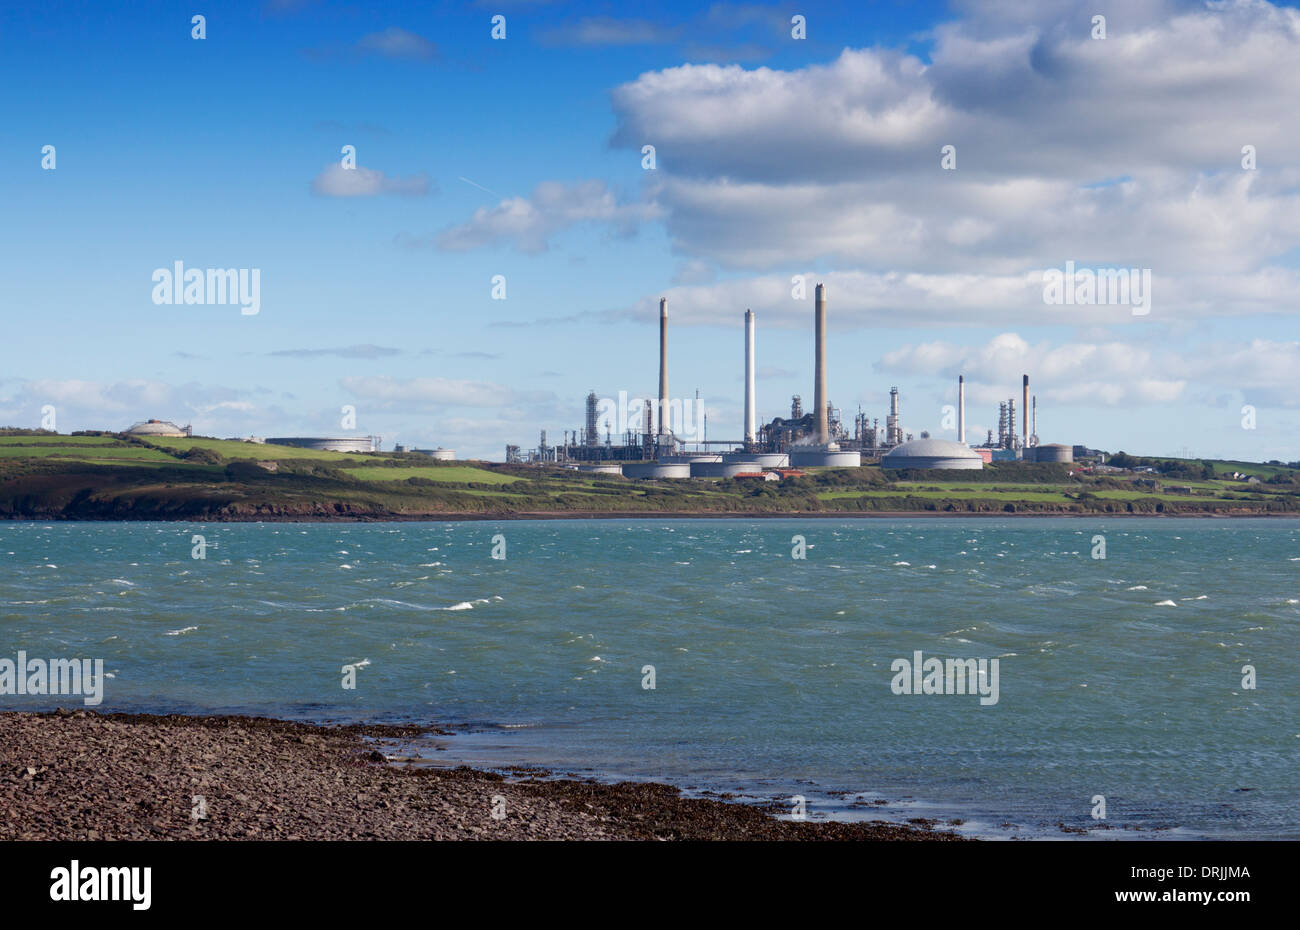 Valero anciennement Chevron Oil Refinery Rhoscrowther Pembrokeshire Milford Haven West Wales UK Banque D'Images